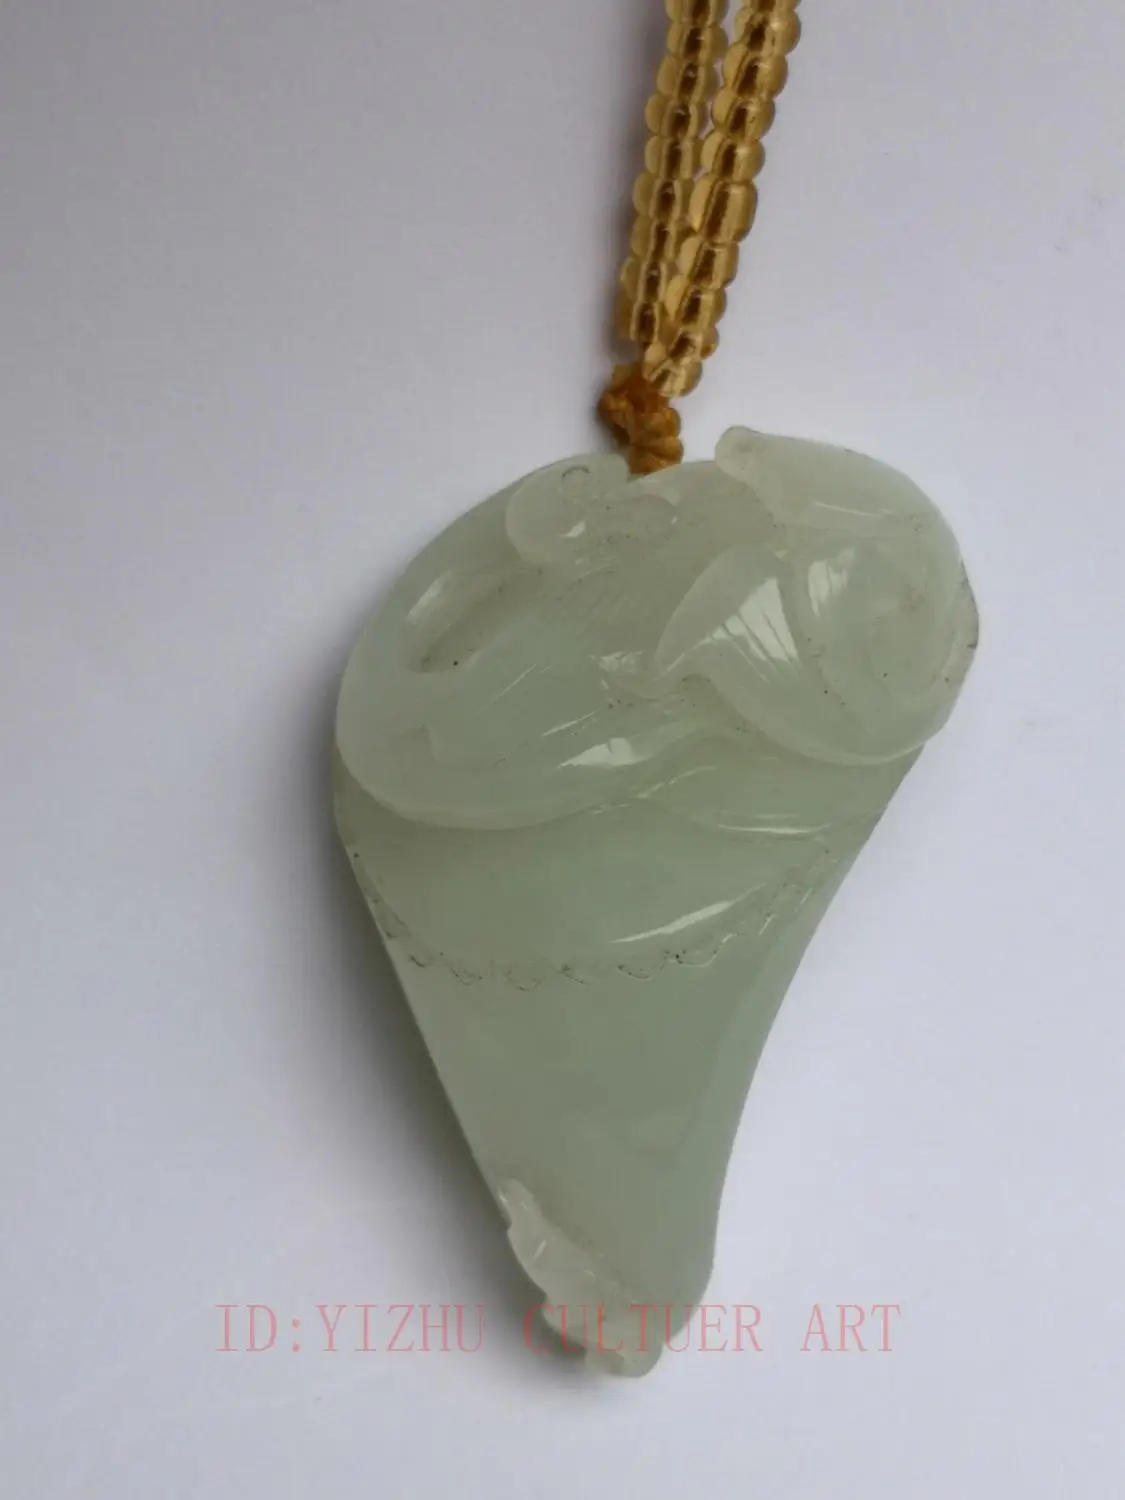 YIZHU CULTUER ART Collection Old China Xinjiang Jade Carving Swan Statue Pendant Decoration Gift